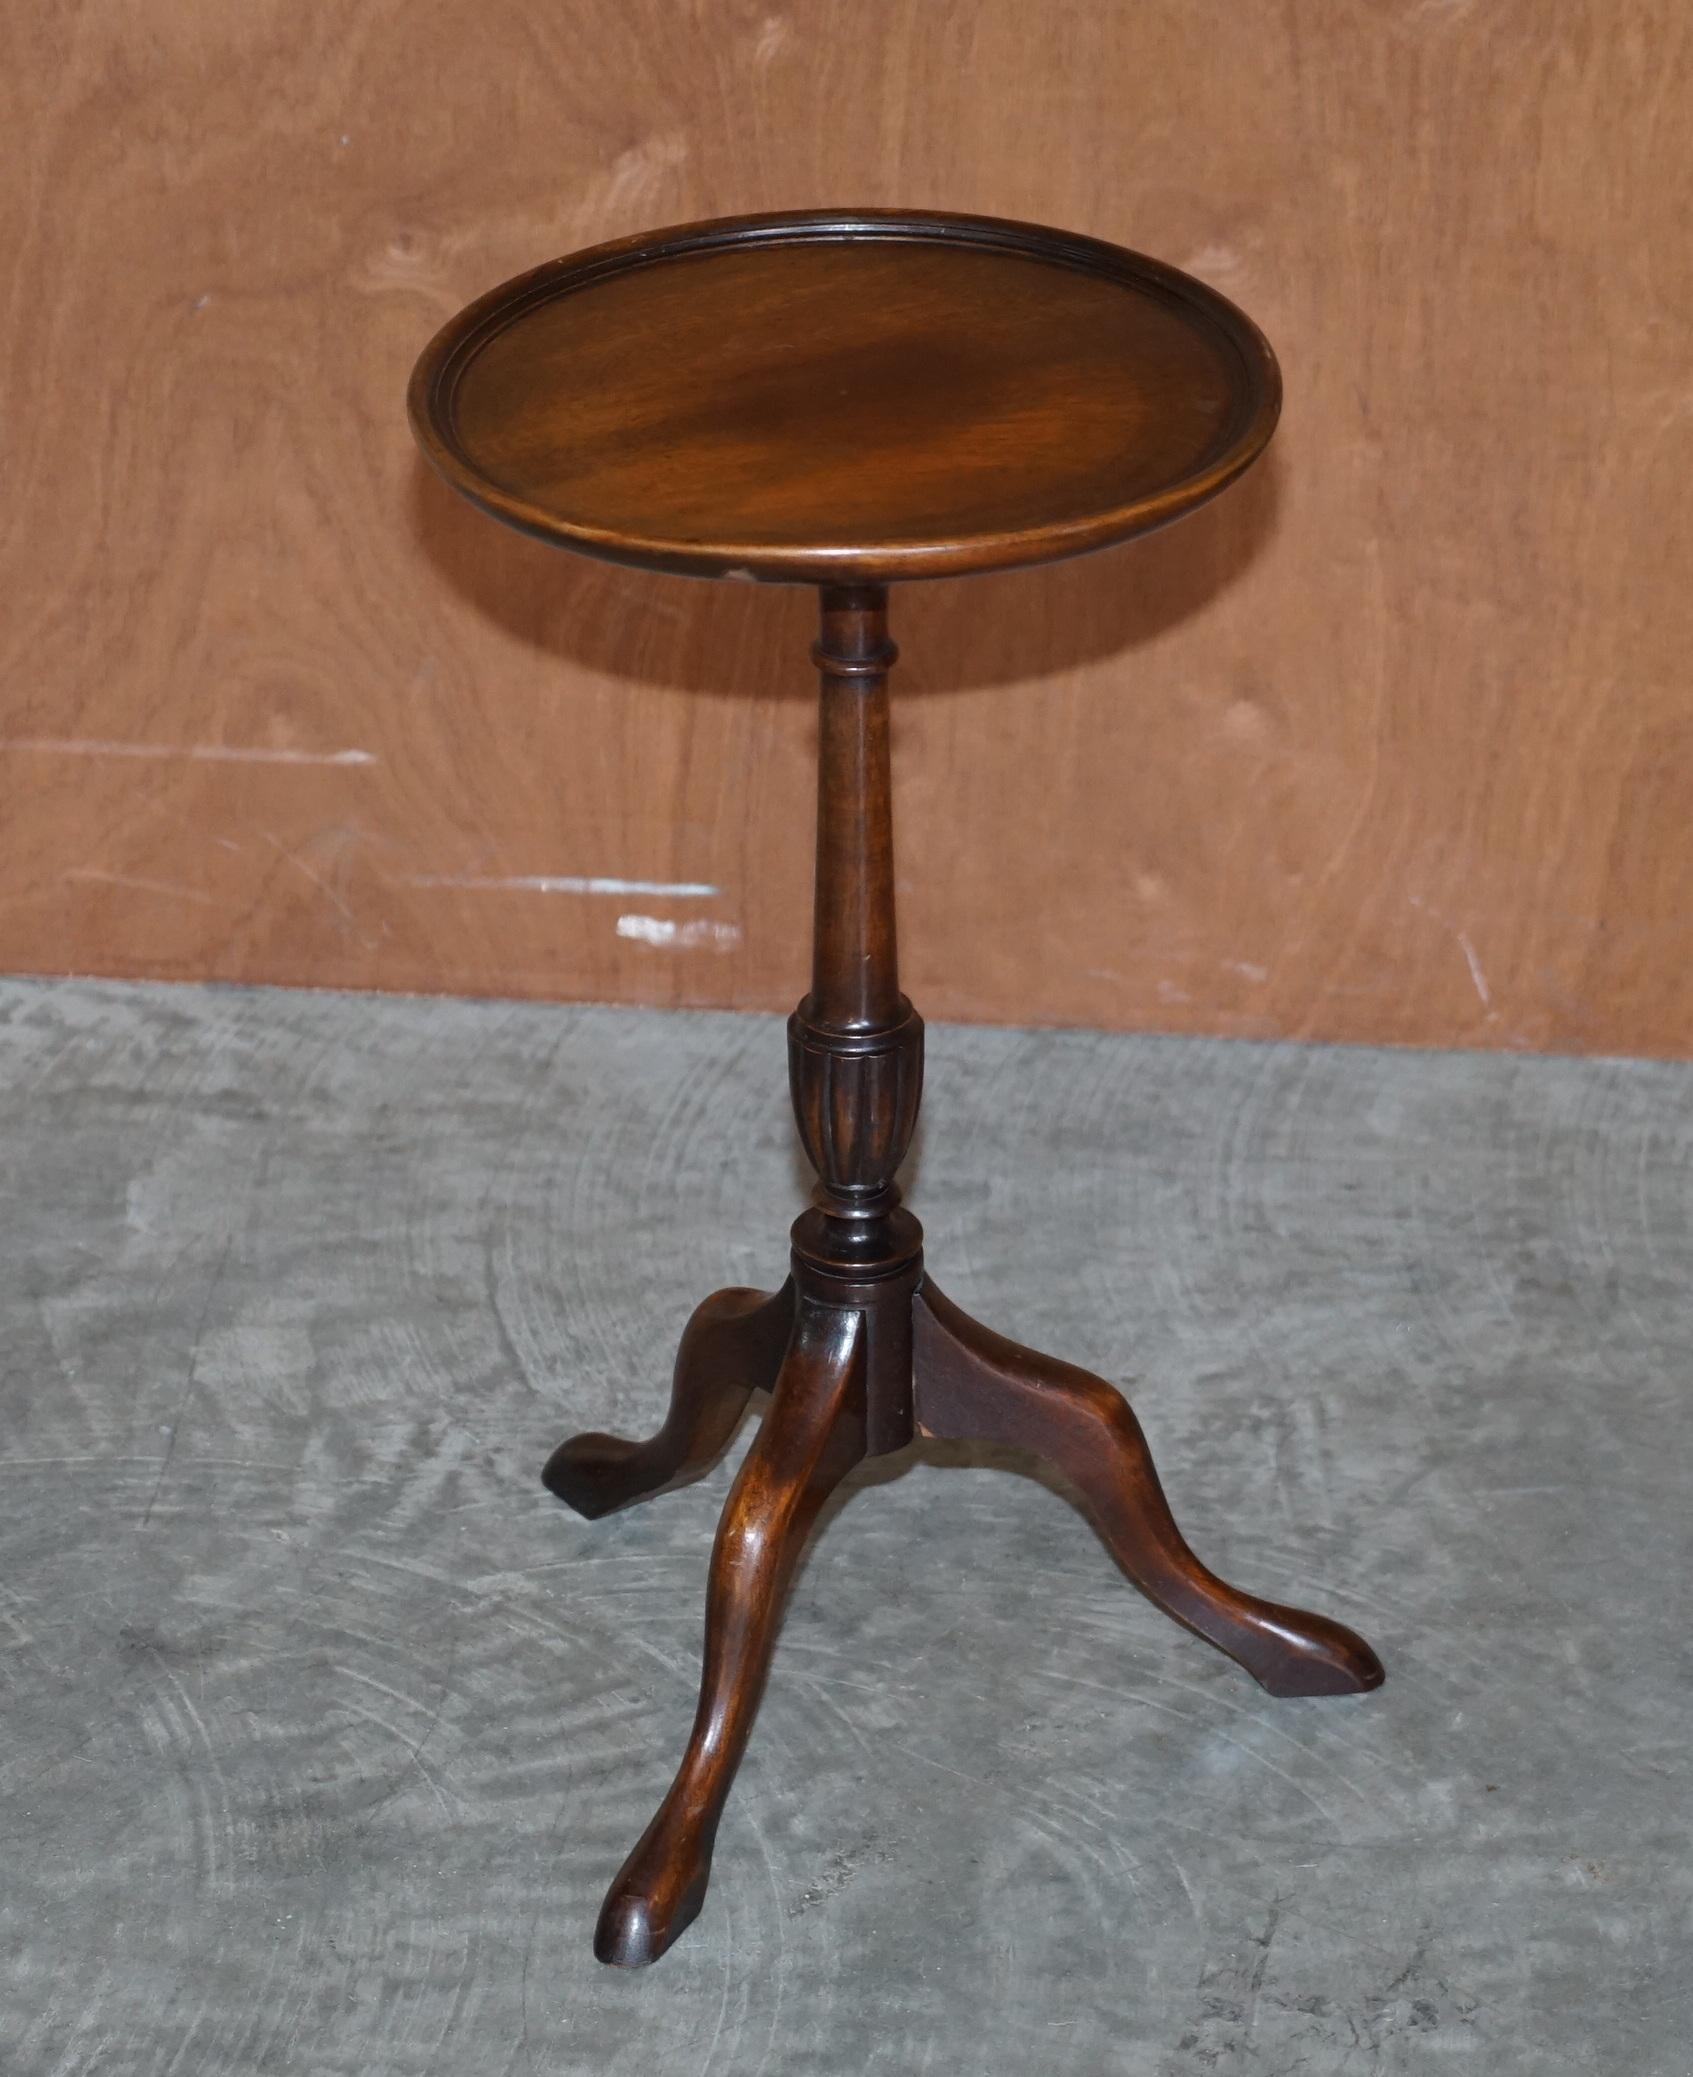 We are delighted to offer for sale this lovely matched pair of mahogany tripod lamp wine tables

A good looking well made and decorative pair, these are a matched pair as in they are the same but slightly different sizes 

The tables have been